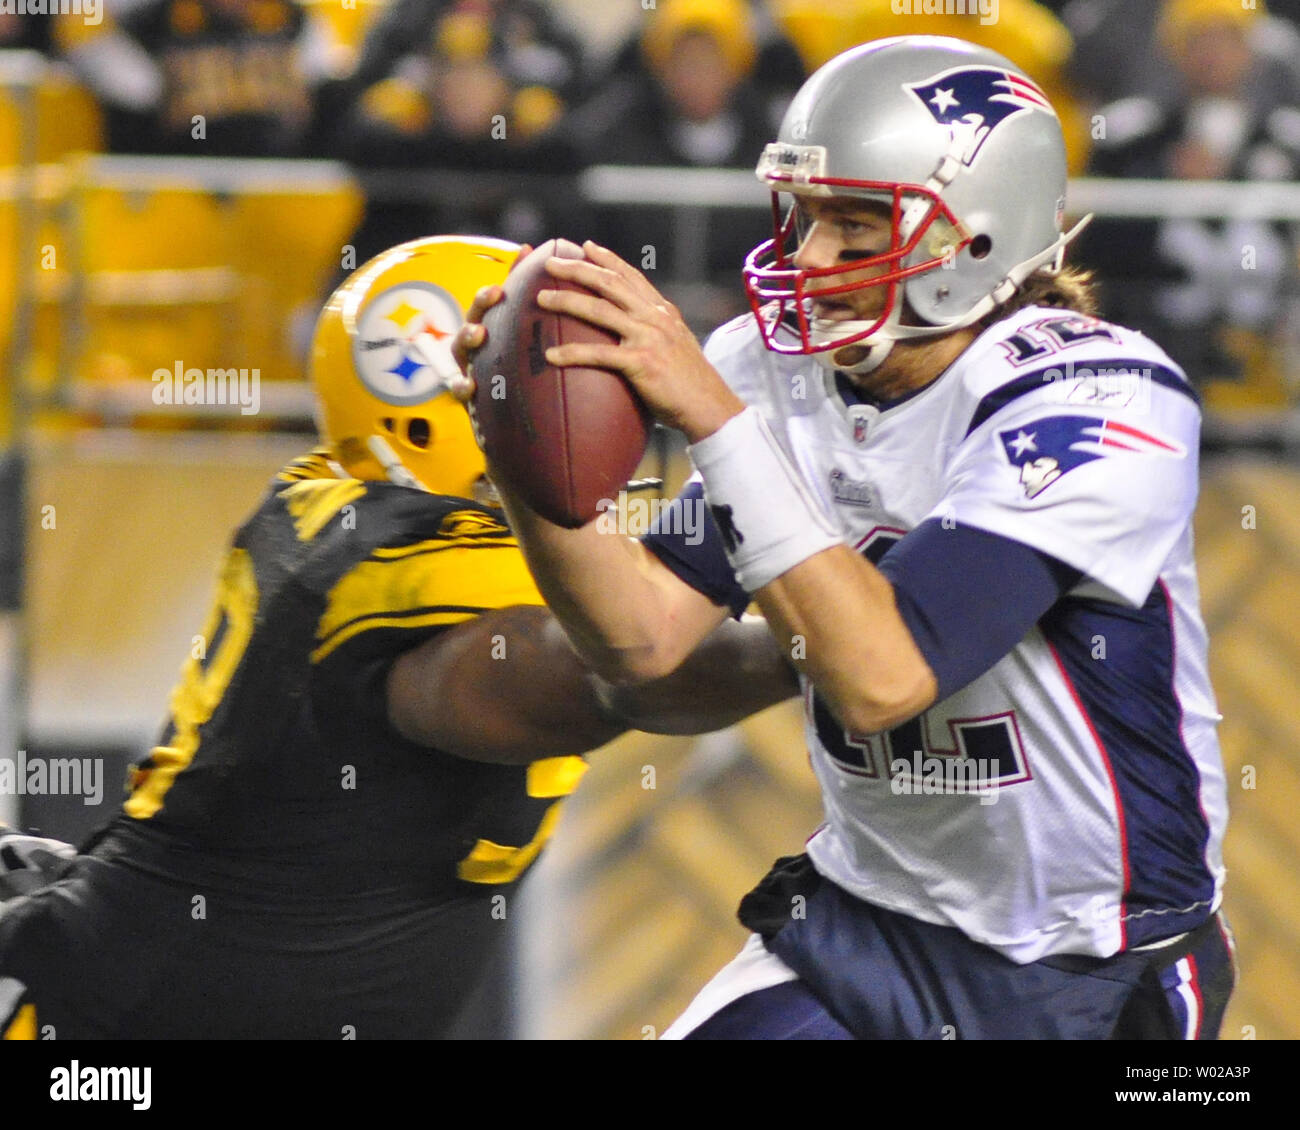 New England Patriots quarterback Tom Brady evades Pittsburgh Steelers  defensive tackle Casey Hampton and completes a pass in the third quarter of  the Patriots 39-26 victory over the Steelers at Heinz Field